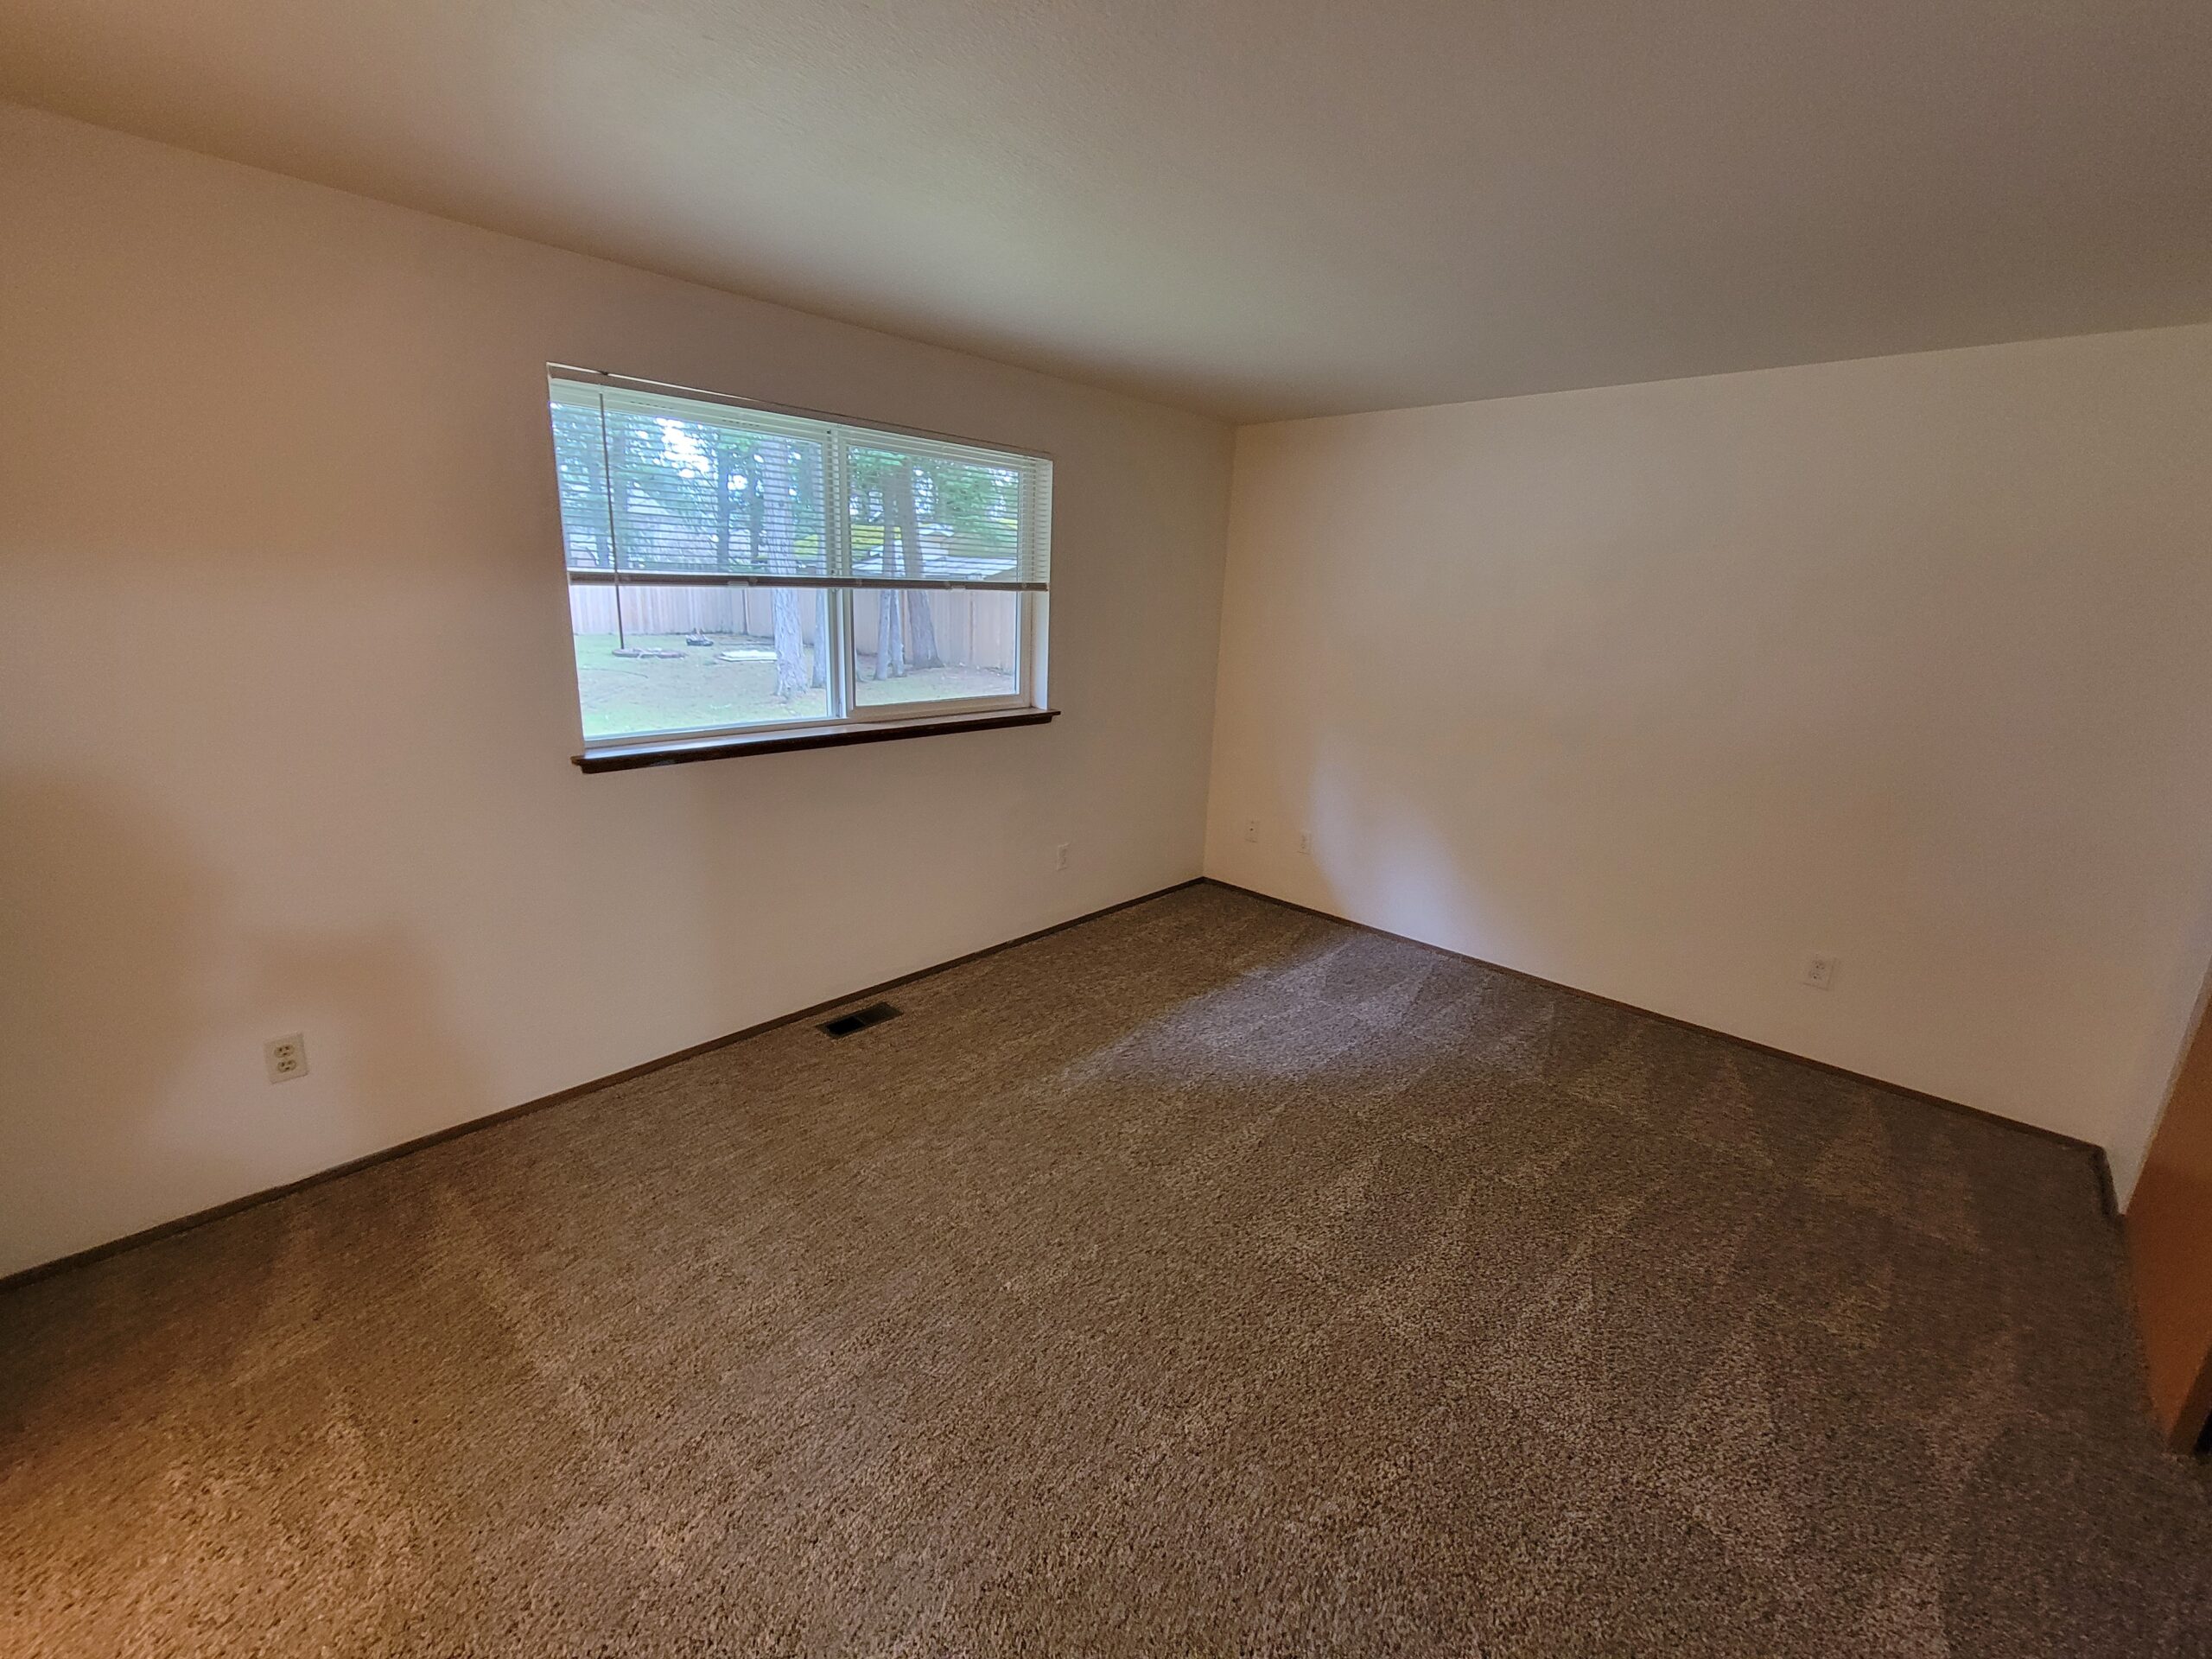 3 Bed 2 Bath with fresh paint and carpet!